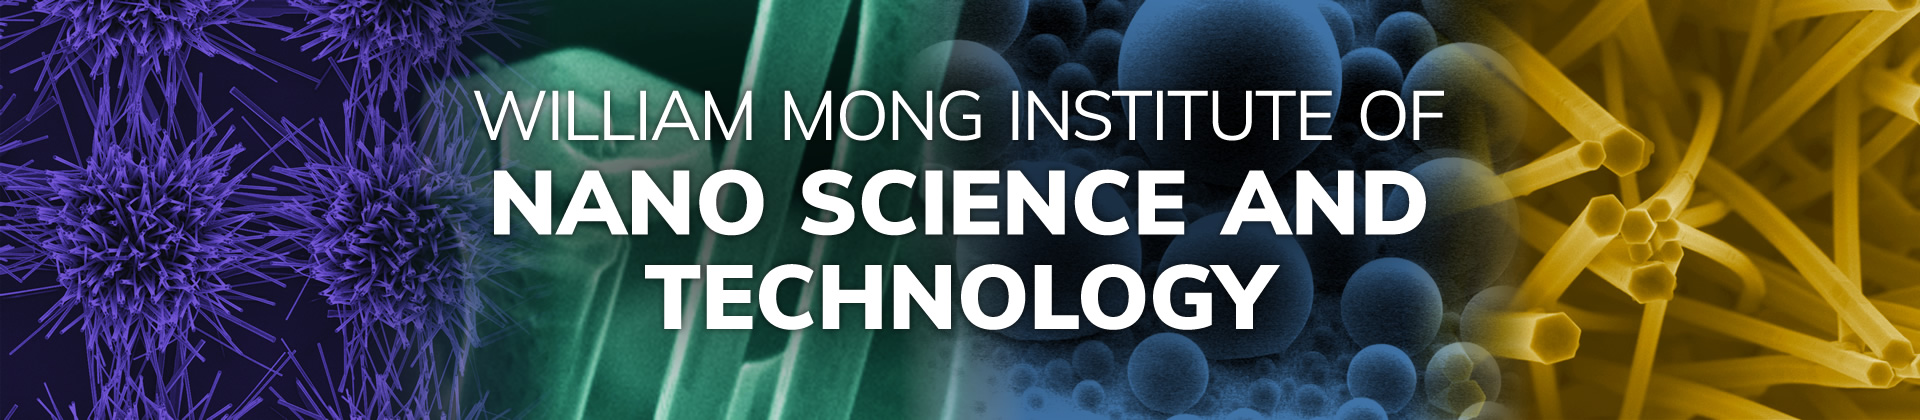 William Mong Institute of Nano Science and Technology